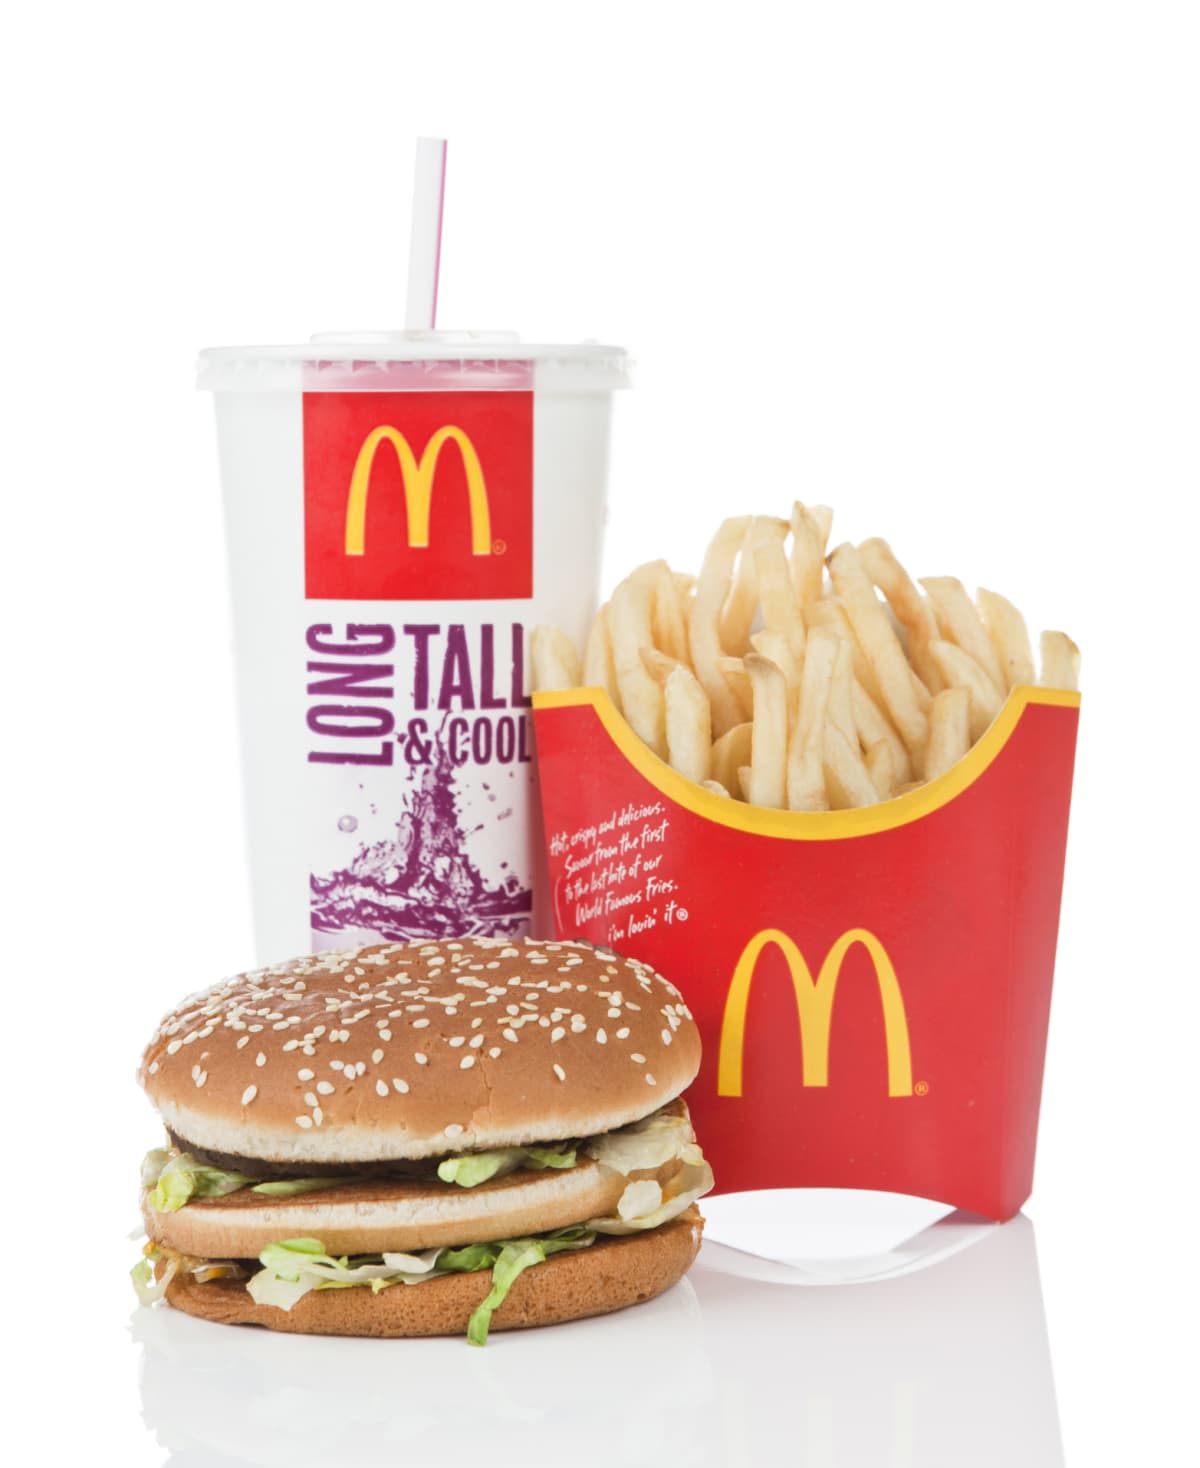 A burger, fries, and drink from McDonald's on a white background.